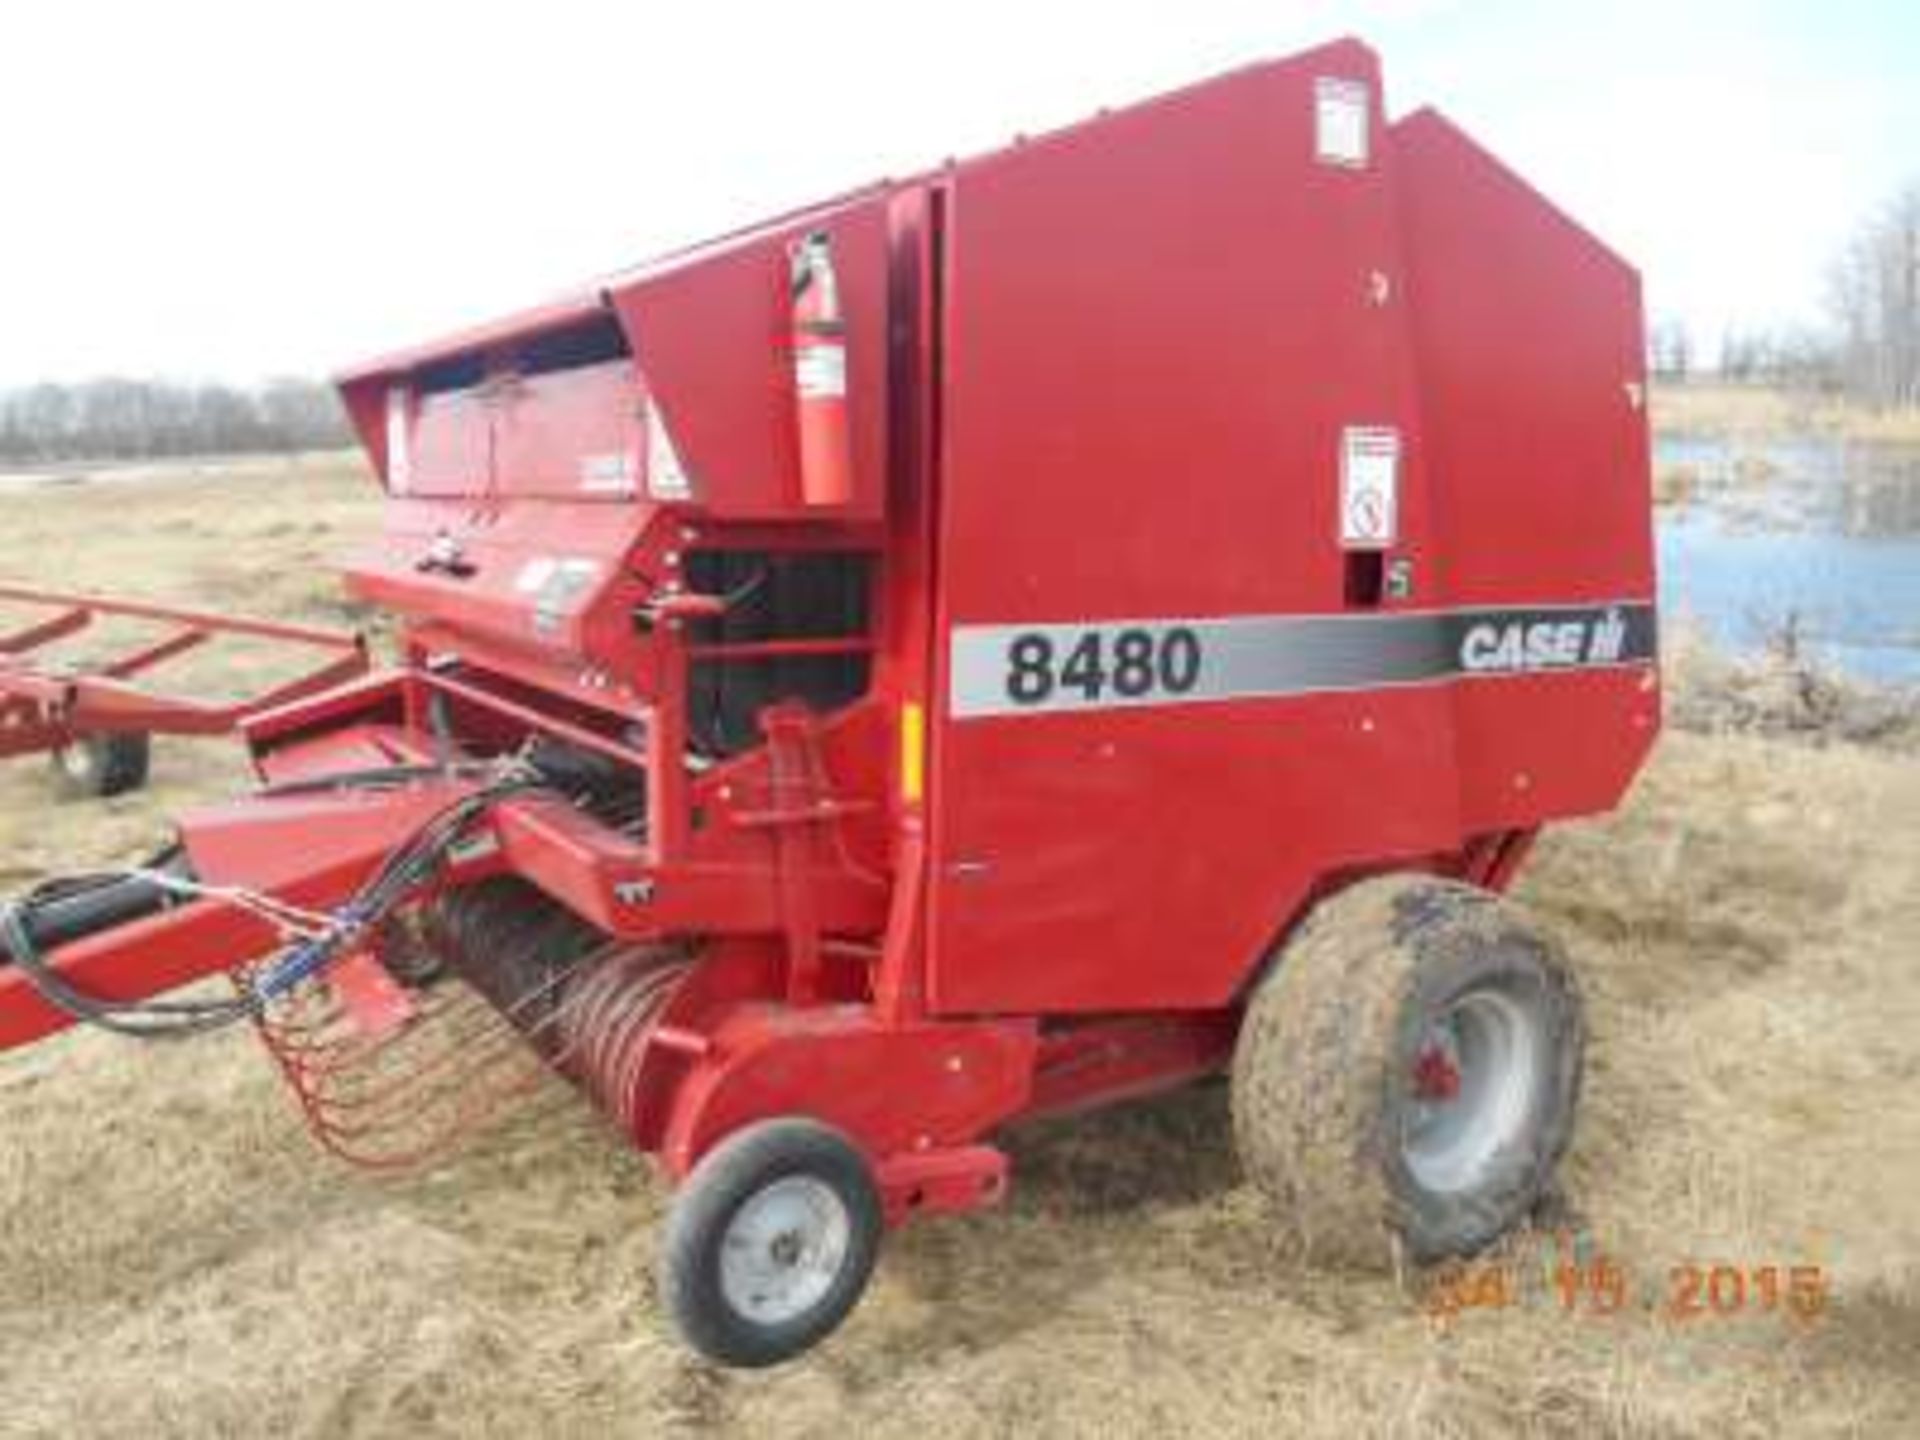 Case ih 8480 soft core round baler â€“(real nice,  been shedded) - Image 2 of 3